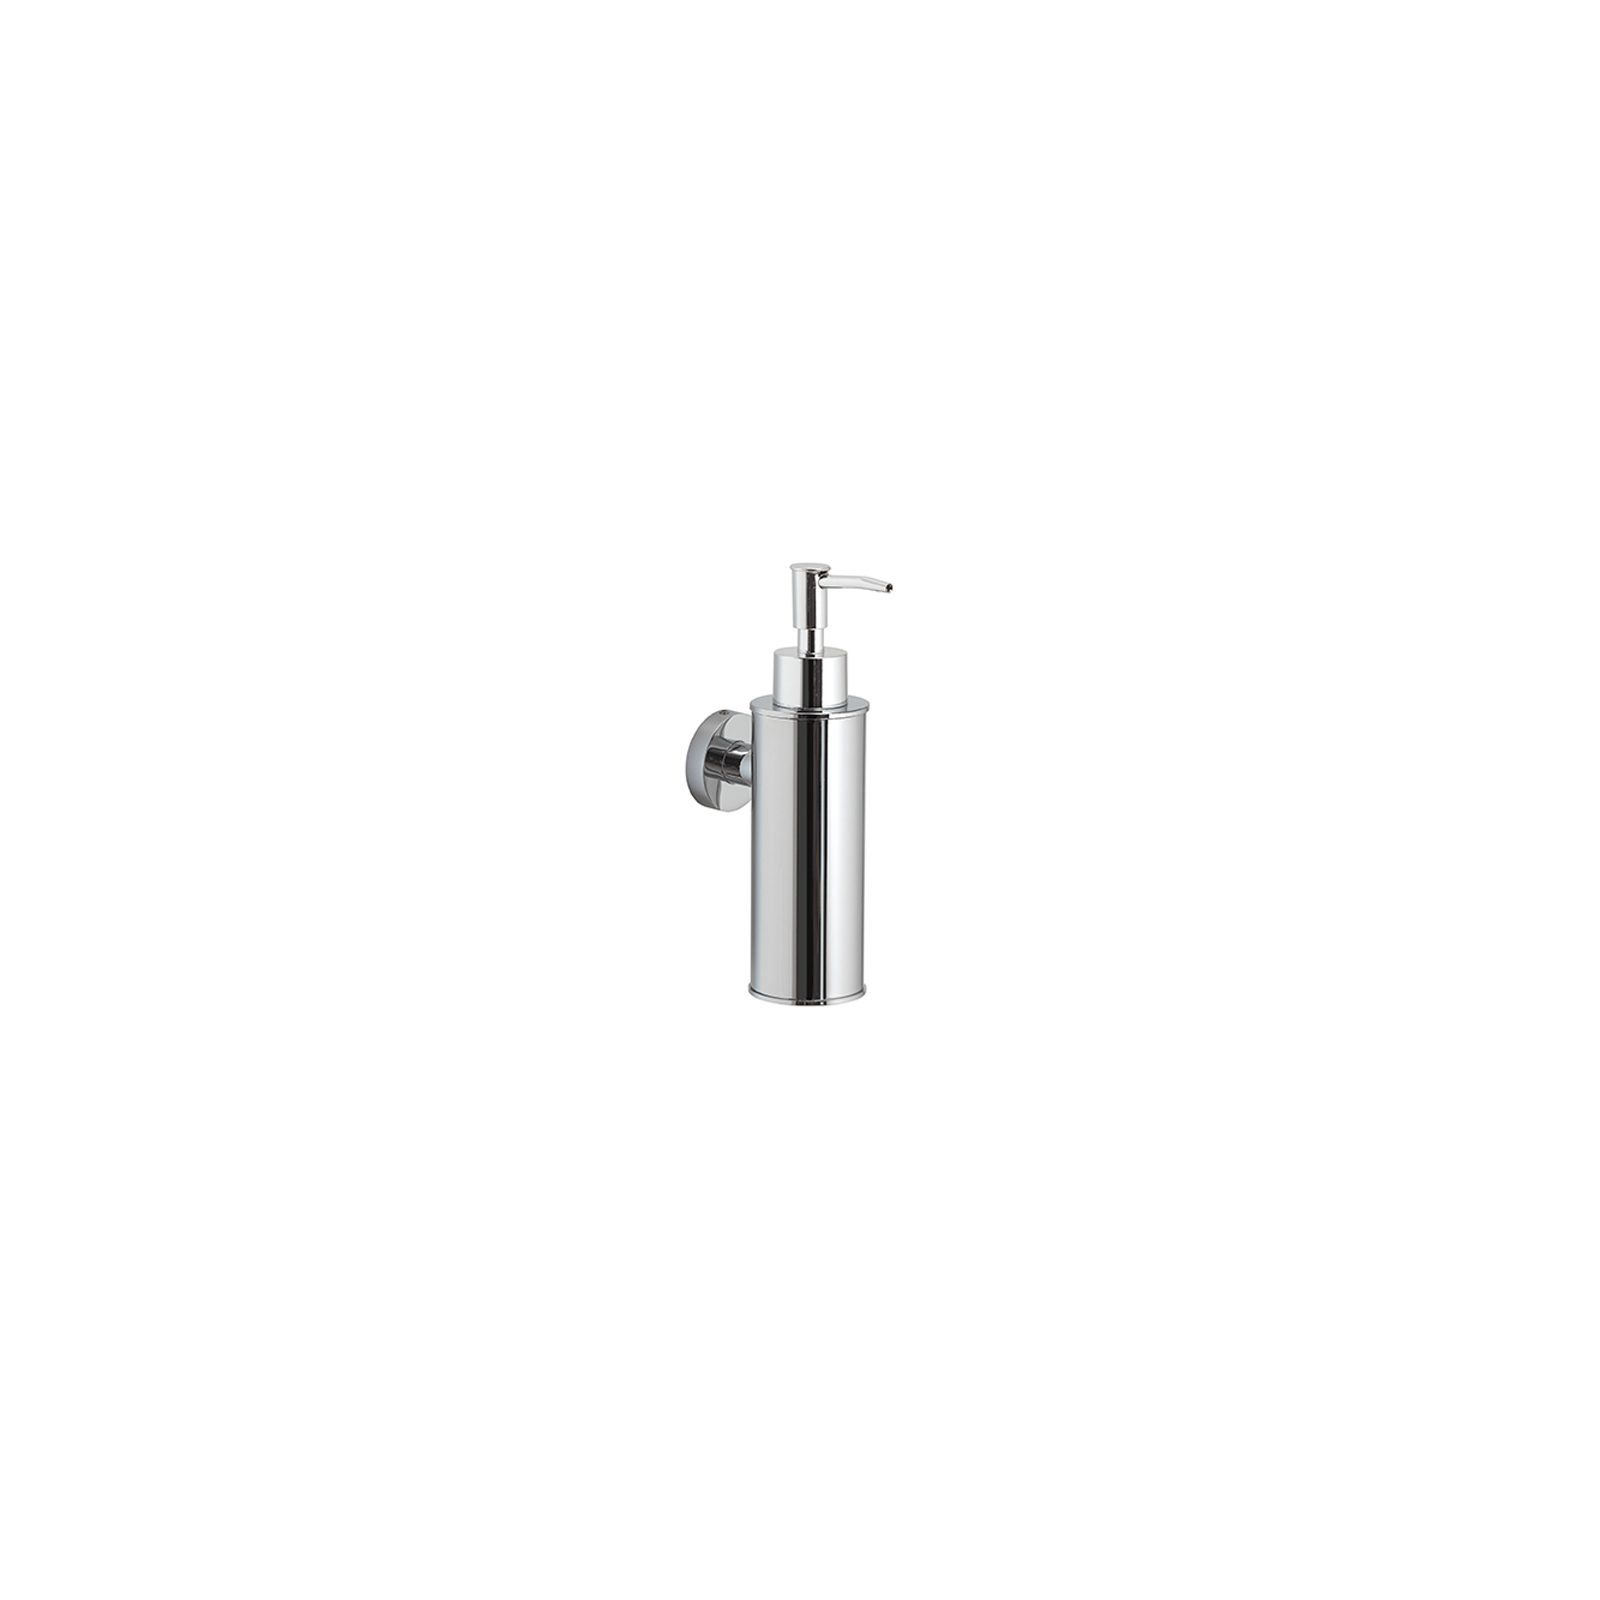 Wall-mounted soap dispenser